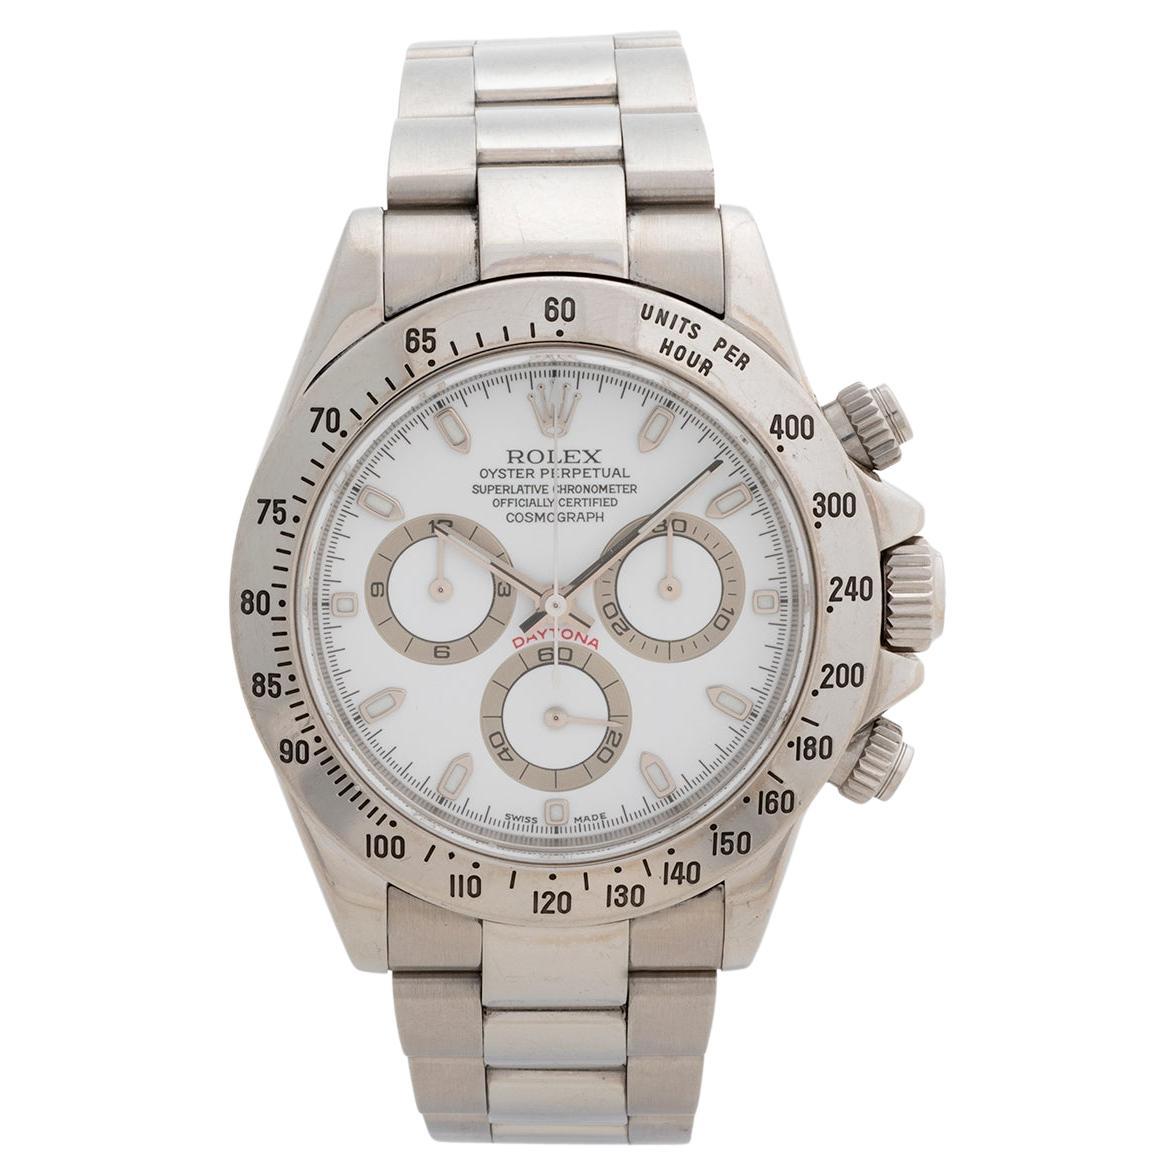 Our Rolex Daytona reference 116520 features a stainless steel case with stainless steel bracelet with flip lock clasp and features a white dial. A complete set, comprising inner and outer box, with 116520 and white dot stickers to the outer box,